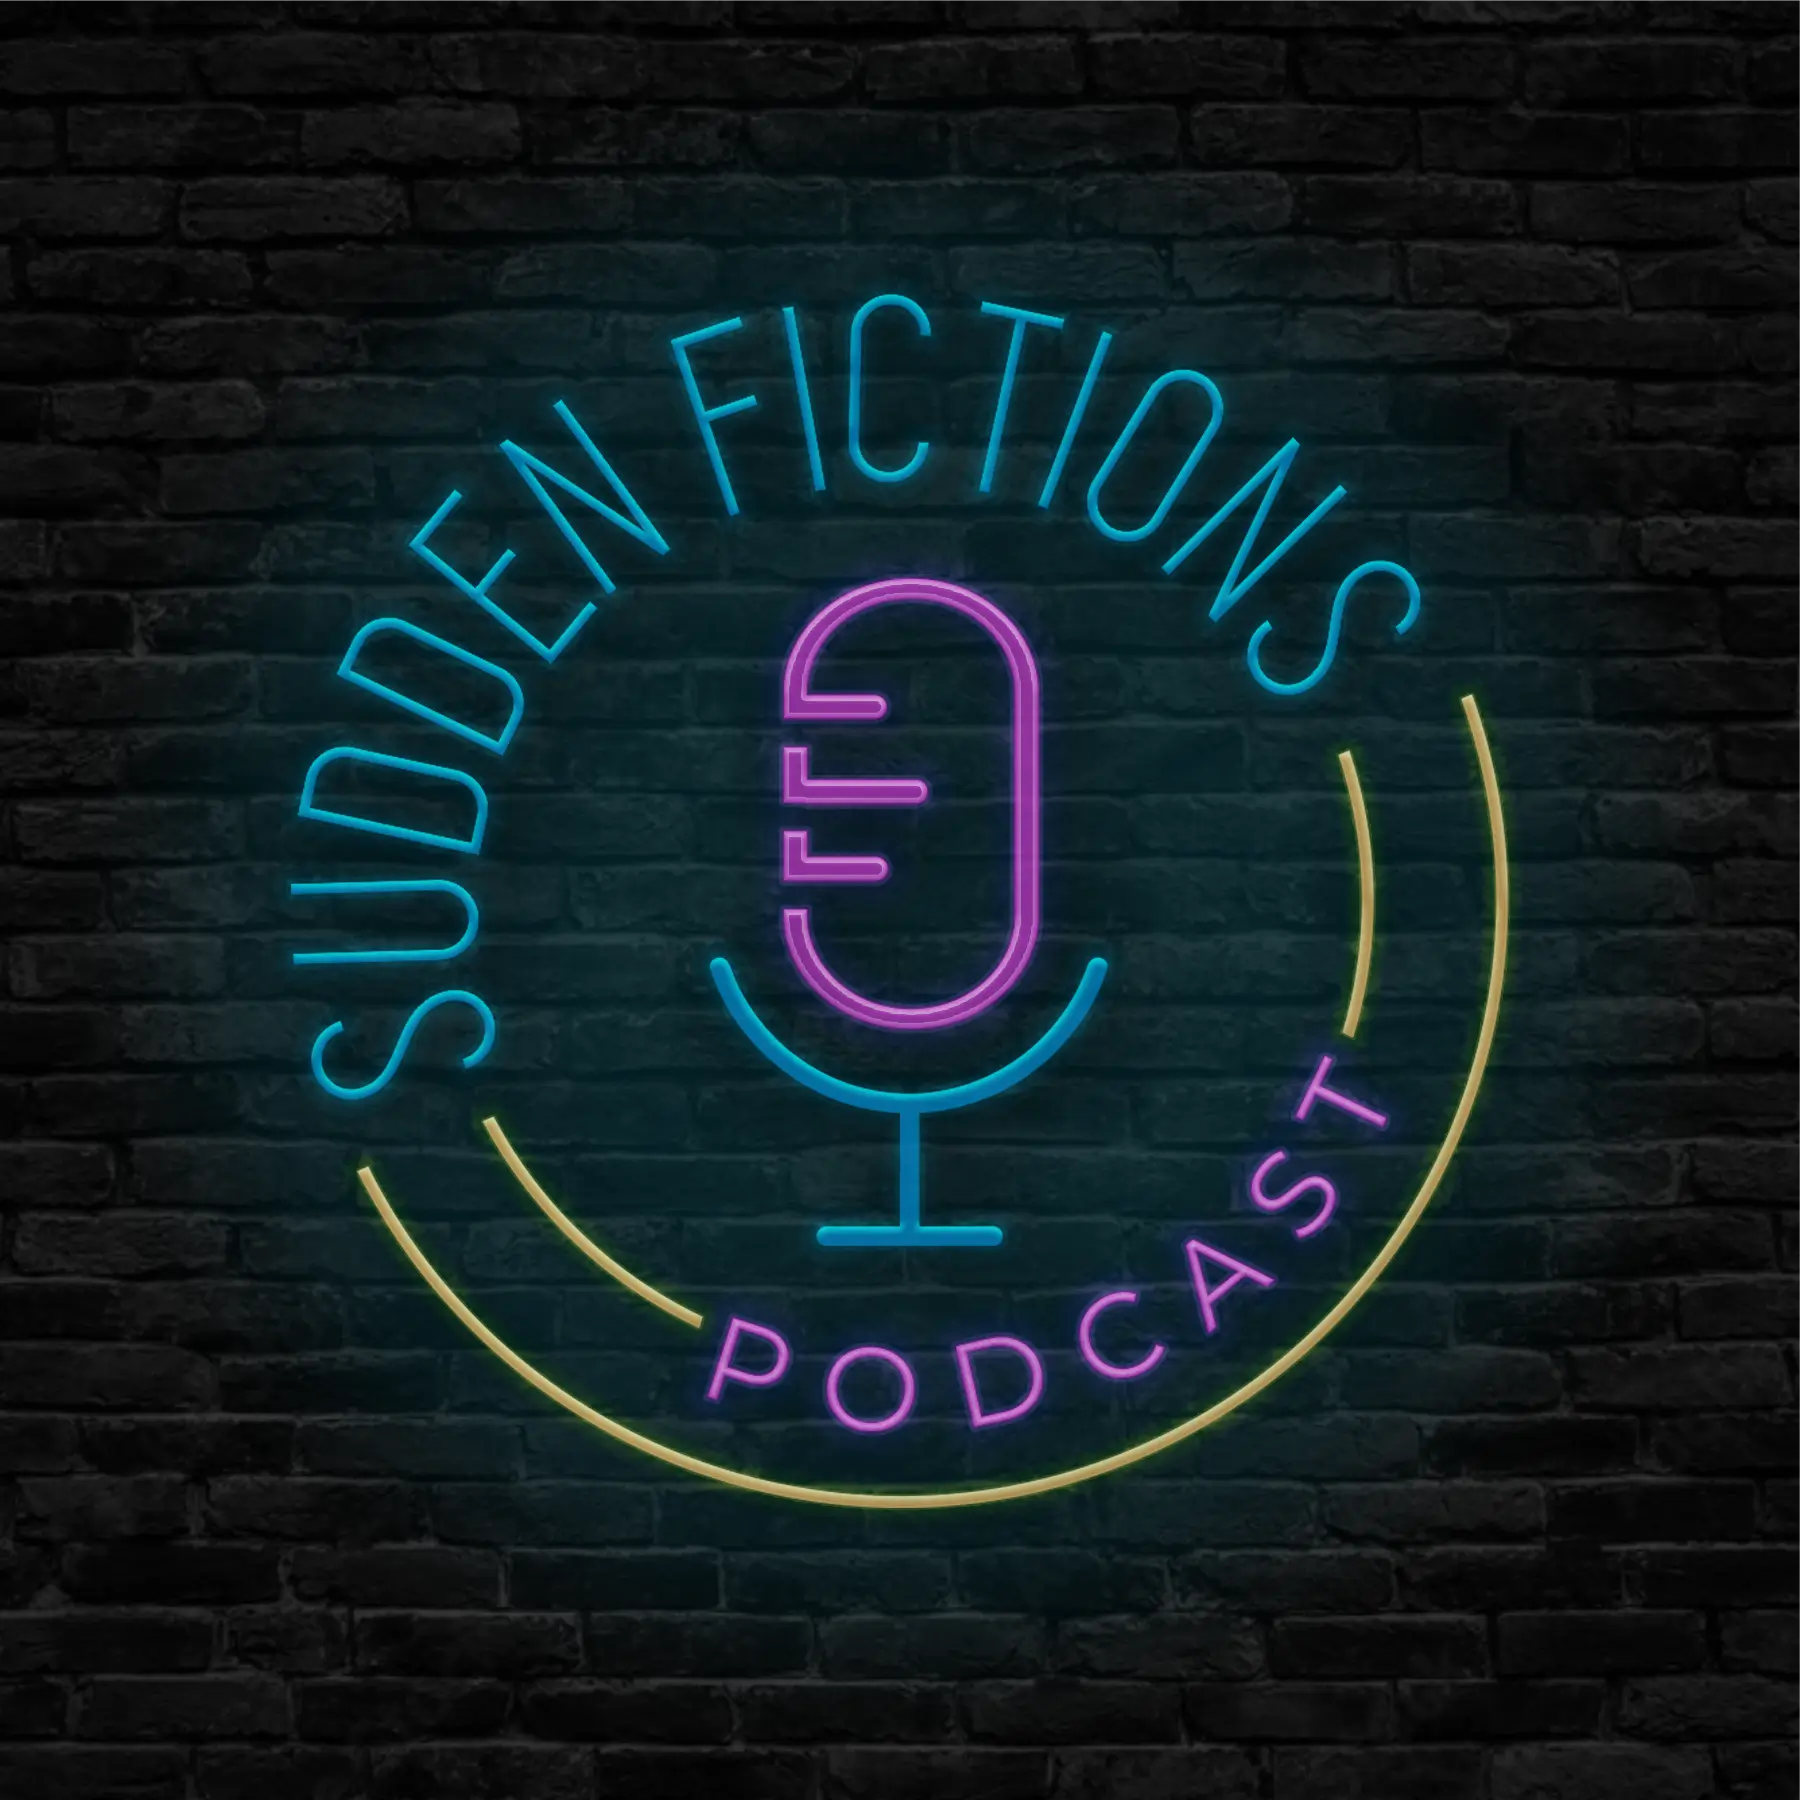 Listen to My Story “Arctic” on Sudden Fictions Podcast!